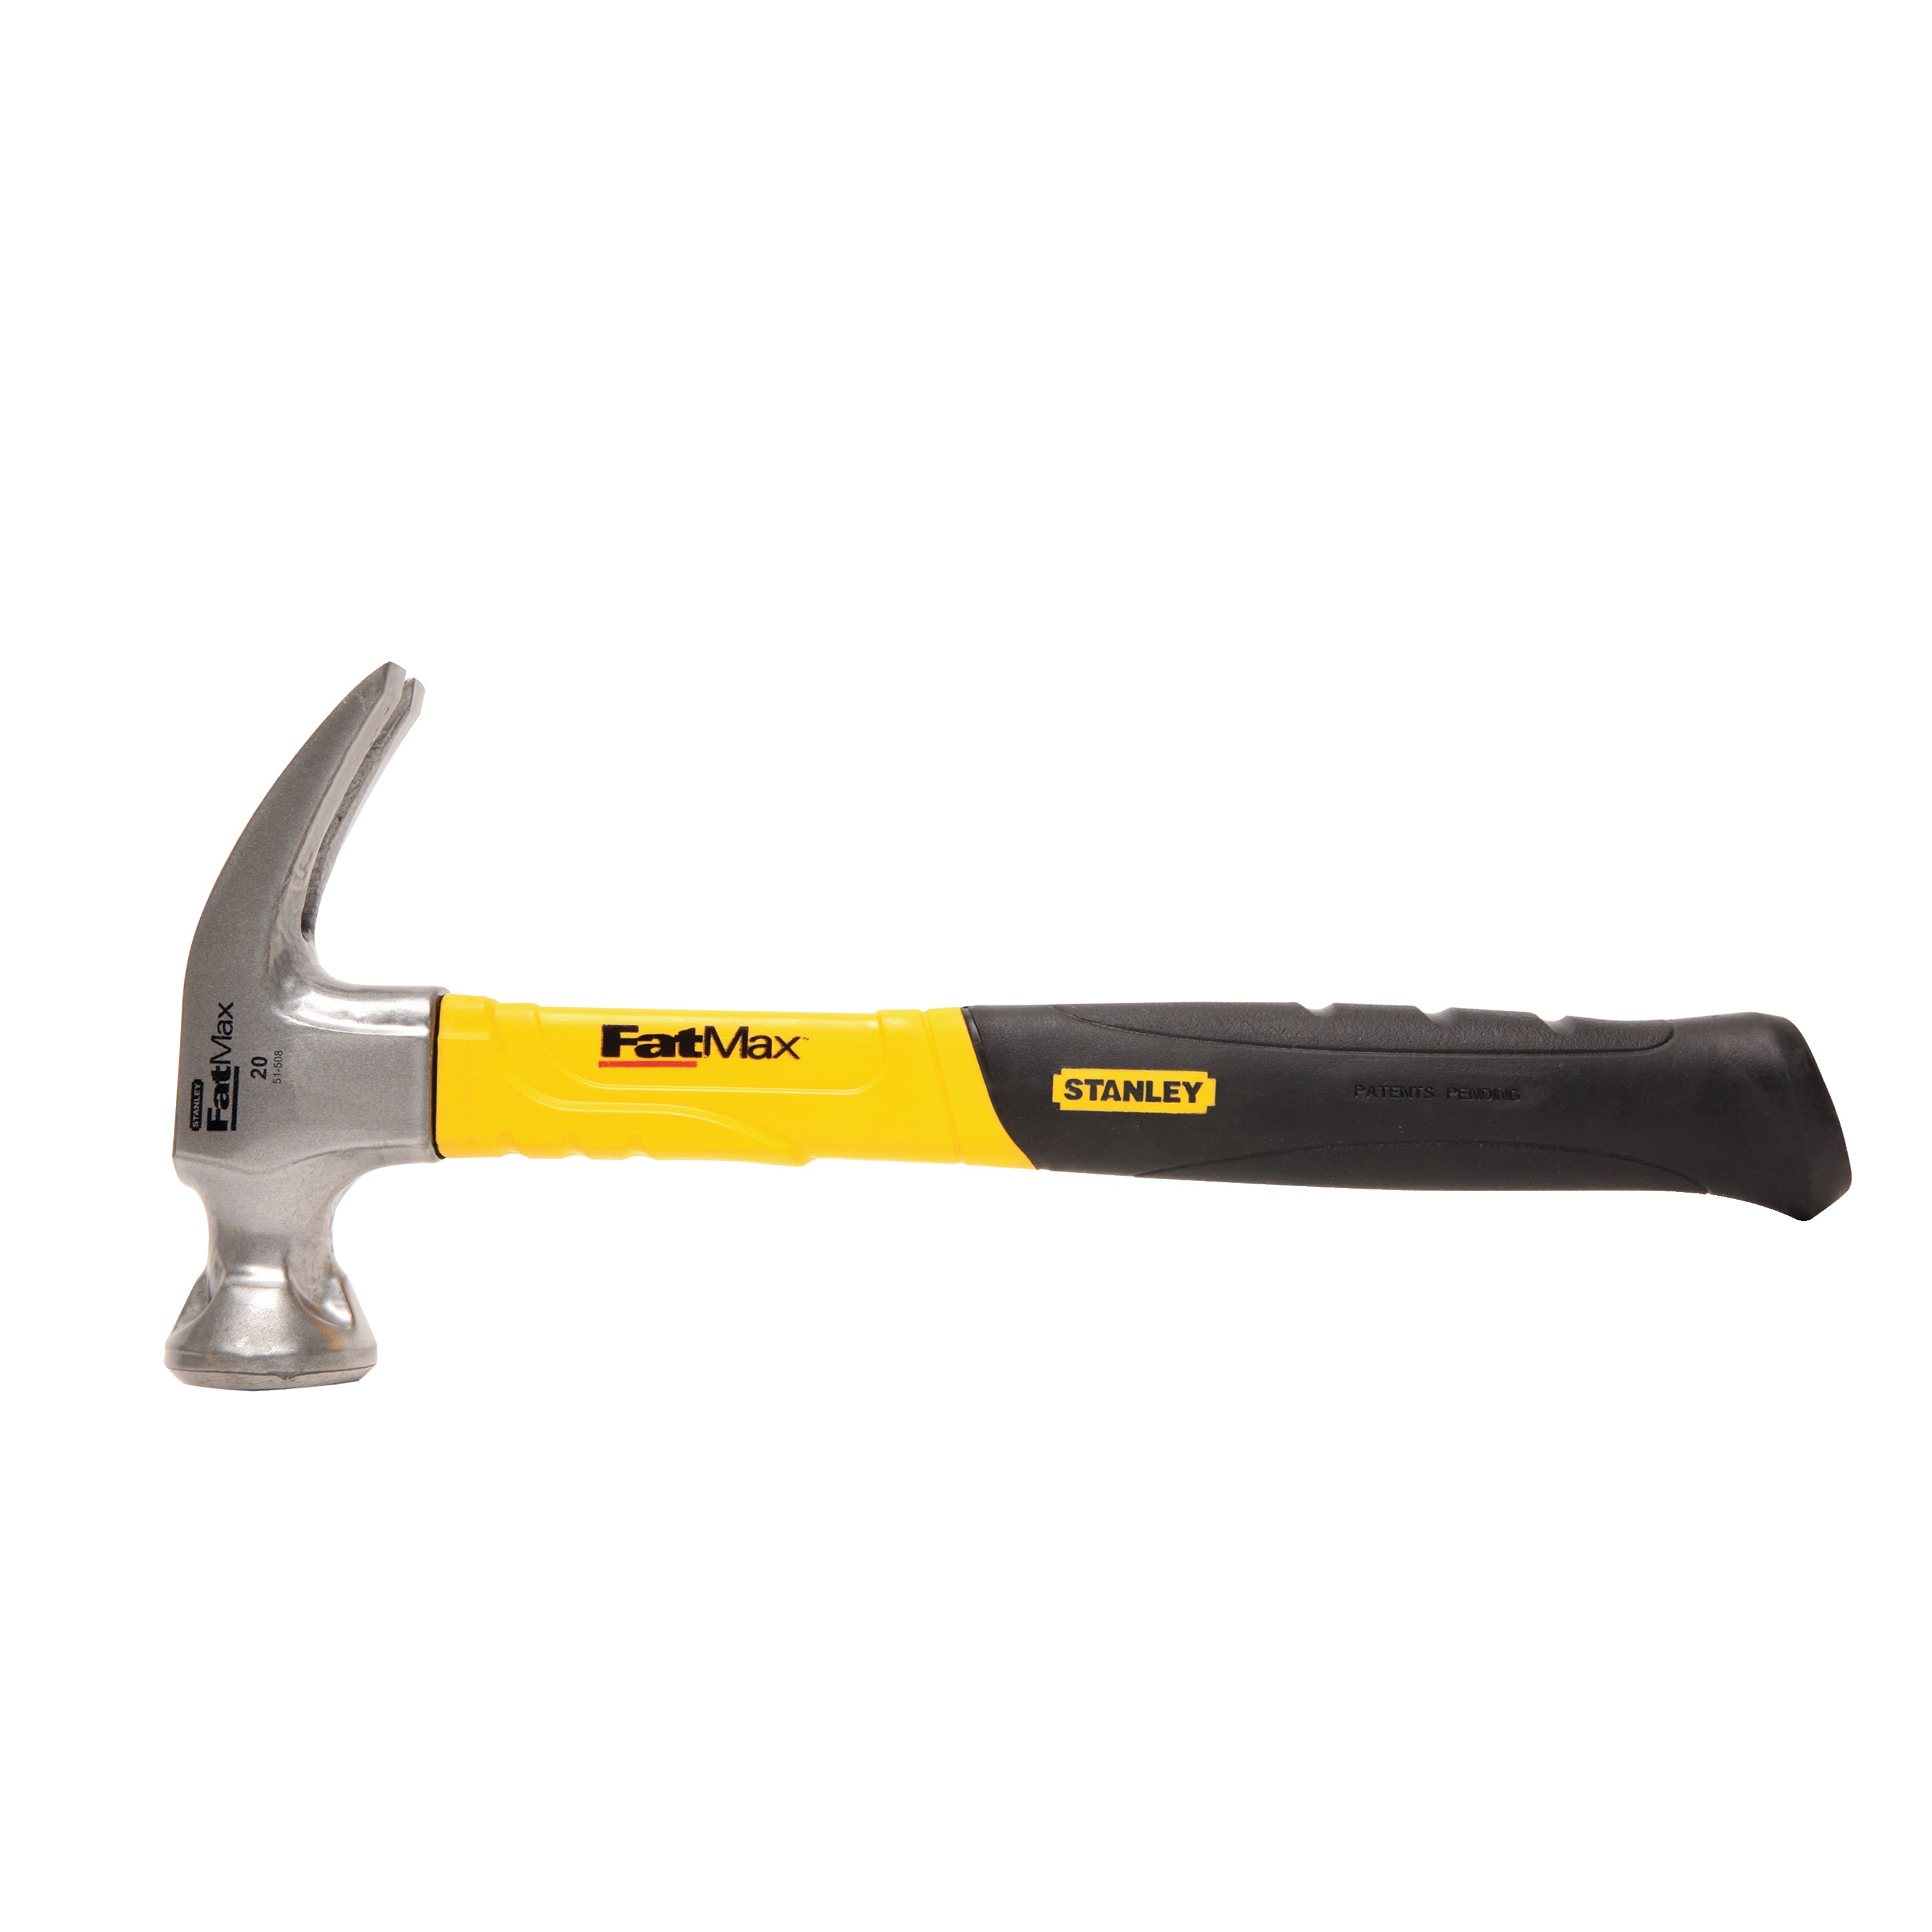 Stanley Tools - 20 oz FATMAX Rip Claw Graphite Hammer - 51-508